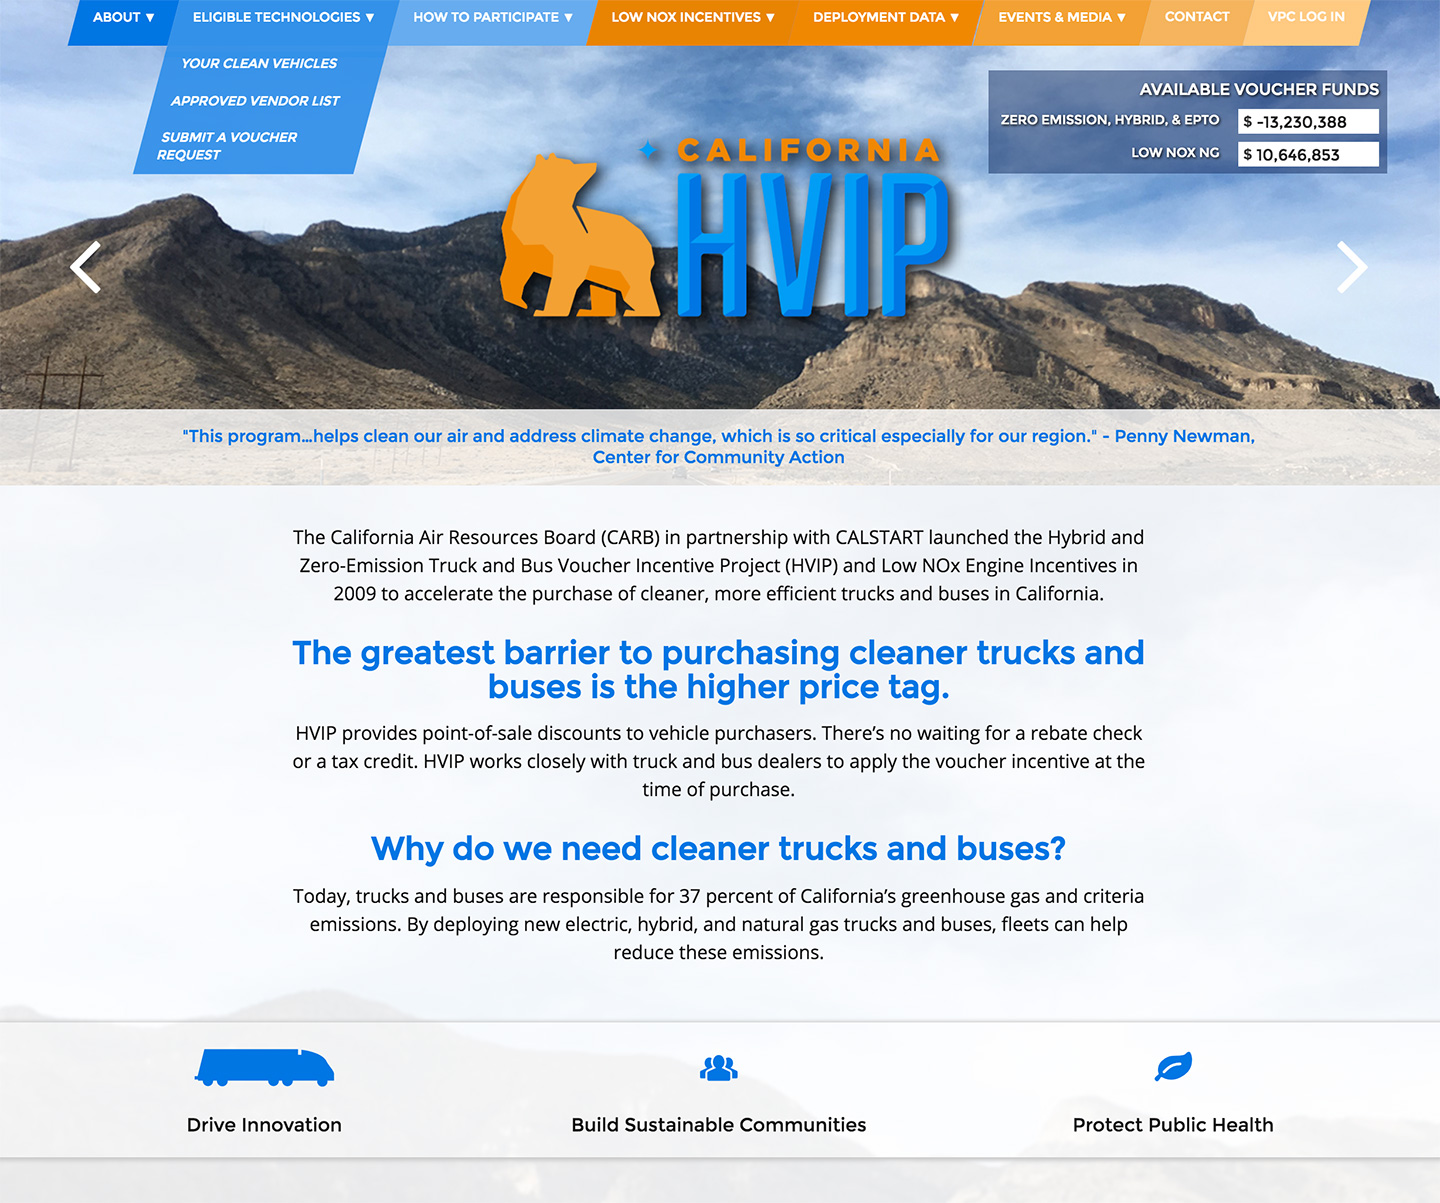 California Hybrid and Zero-Emission Truck and Bus Voucher Incentive Project: CalHVIP Homepage